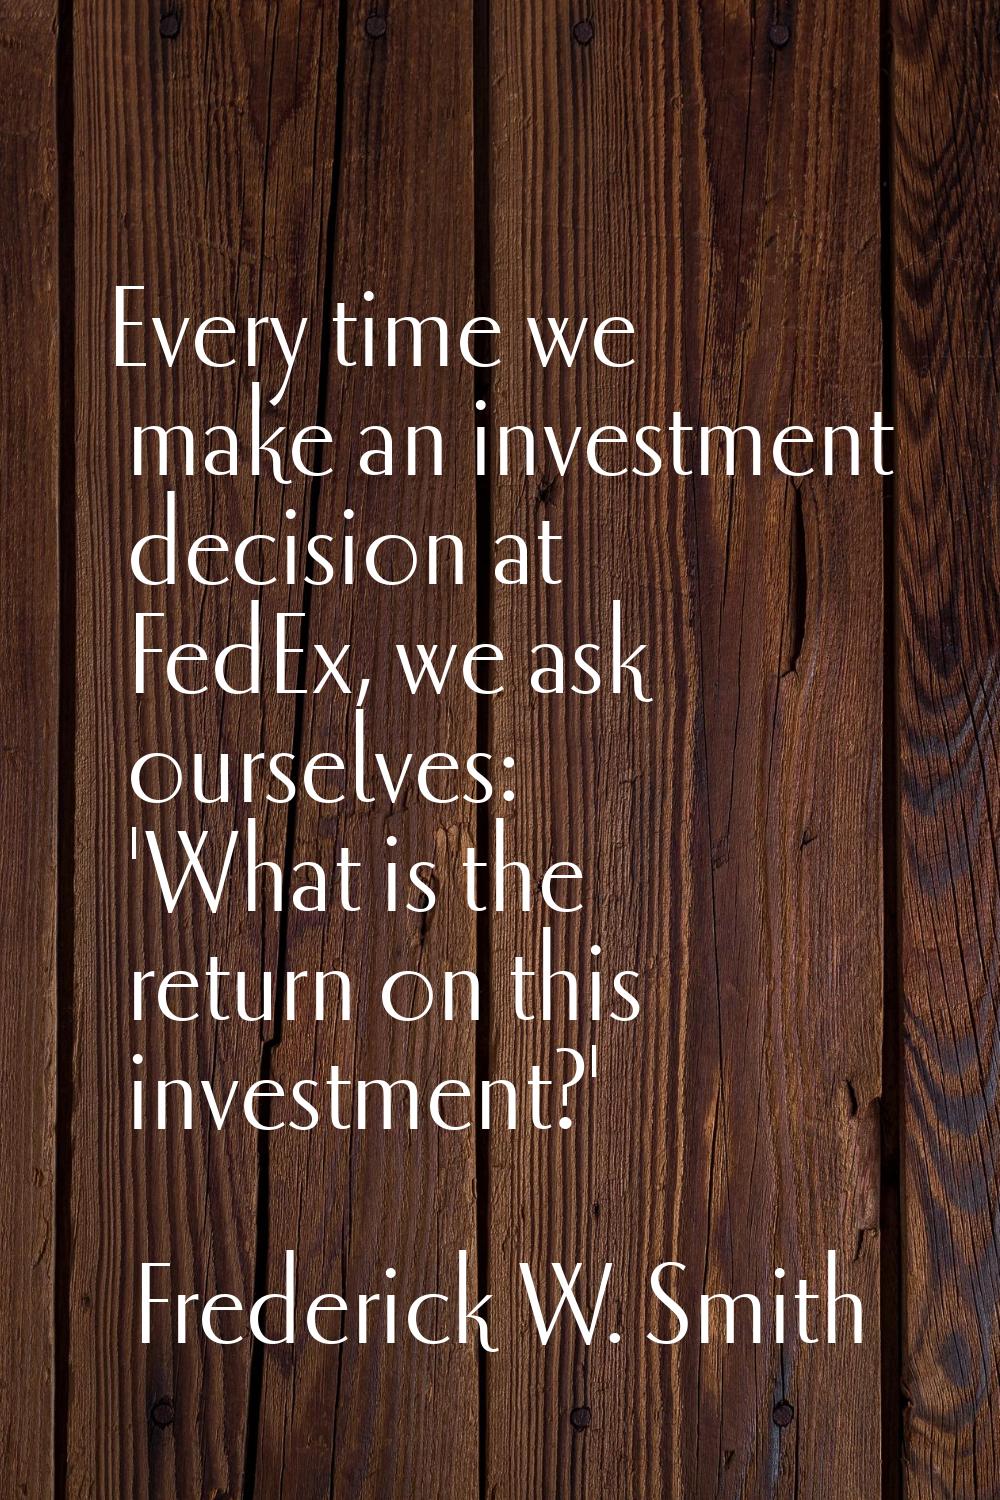 Every time we make an investment decision at FedEx, we ask ourselves: 'What is the return on this i